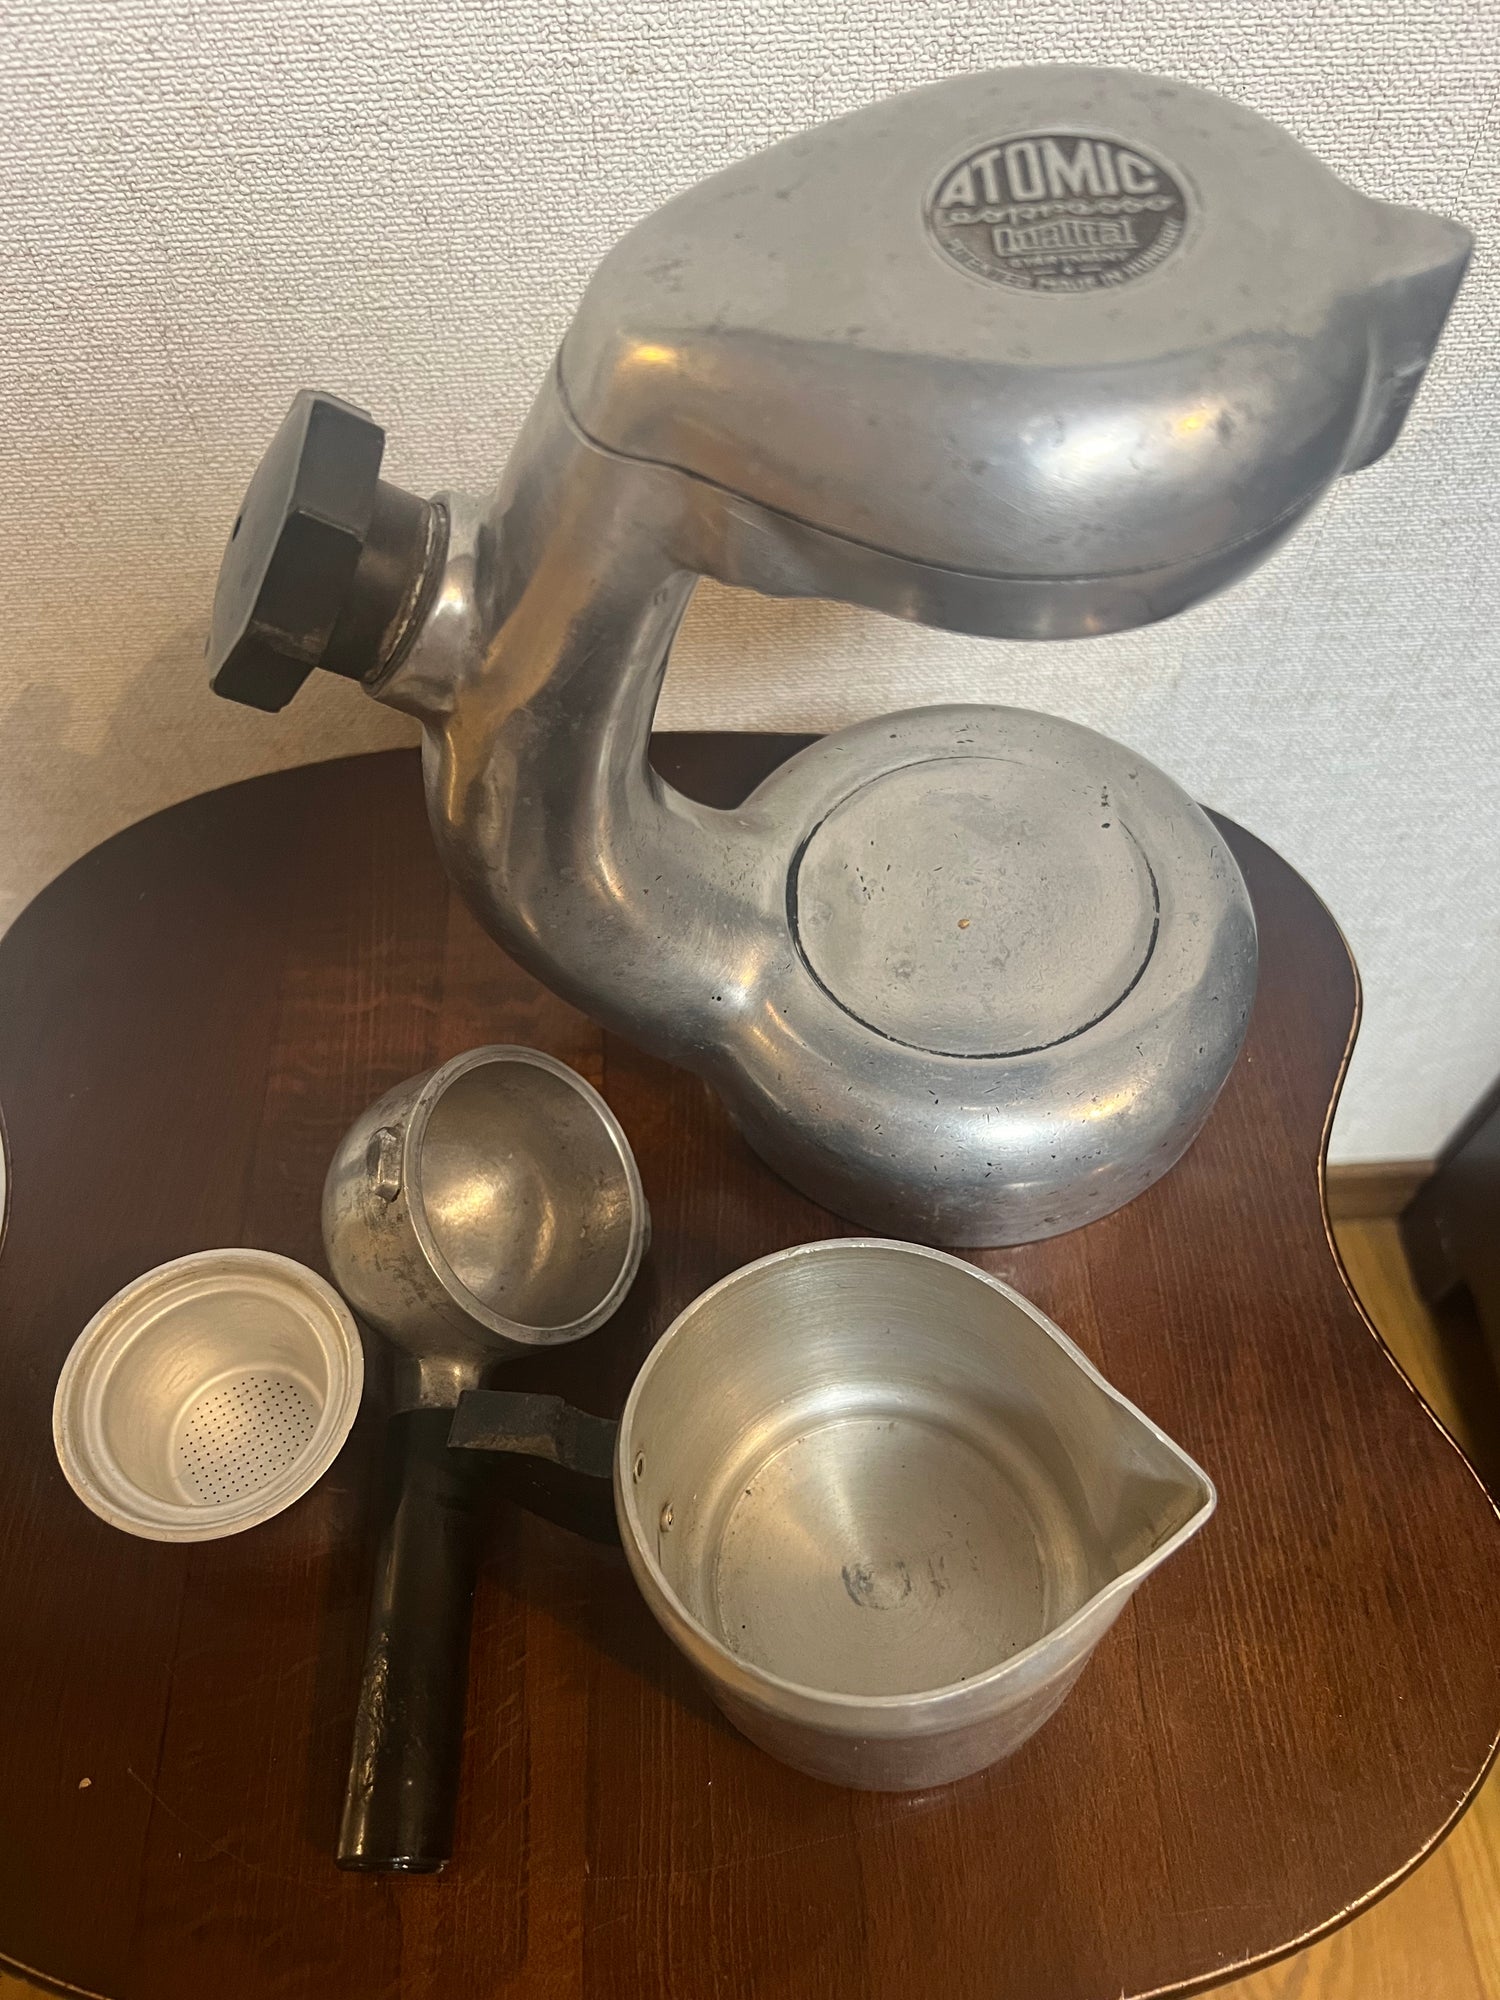 ☆ATOMIC Coffee Maker vintage made in ハンガリー エスプレッソ 